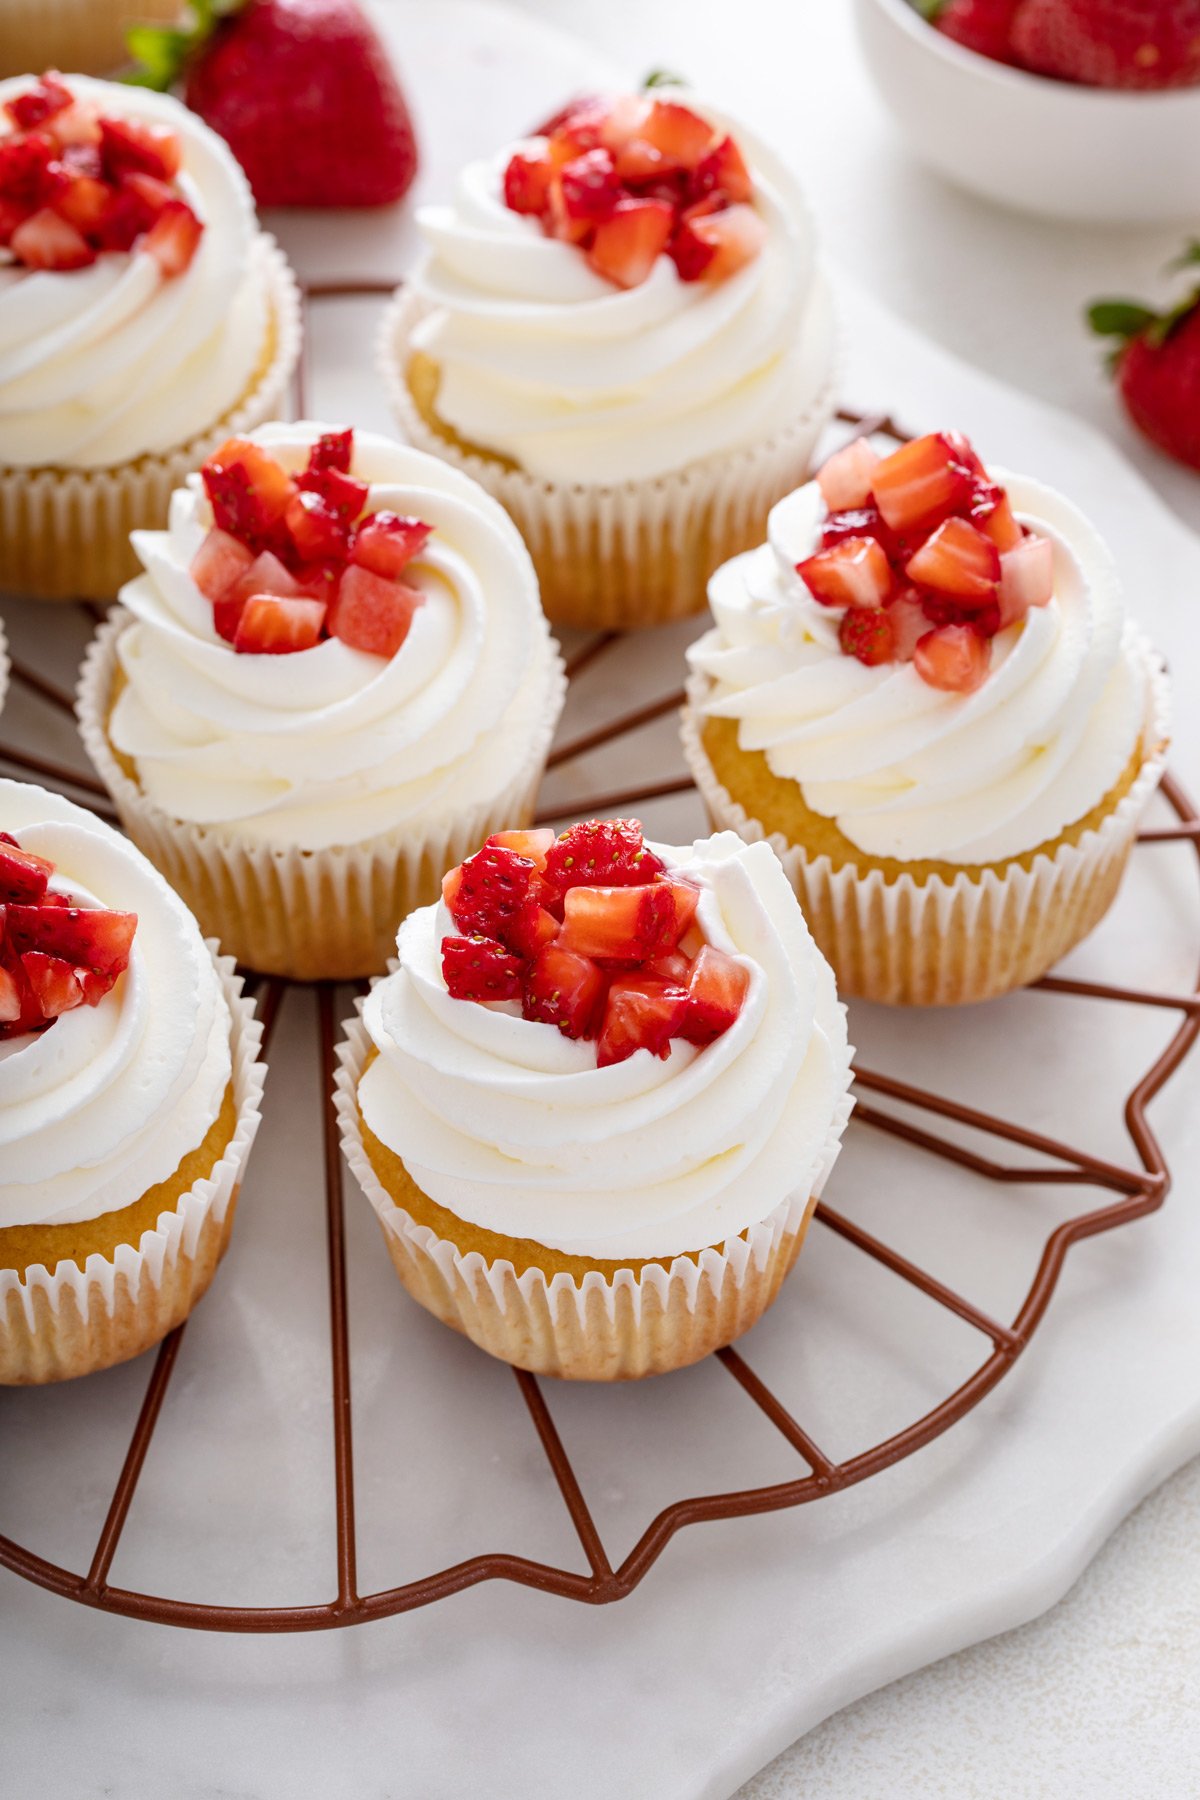 Several strawberry shortcake cupcakes arranged on a round wire rack.